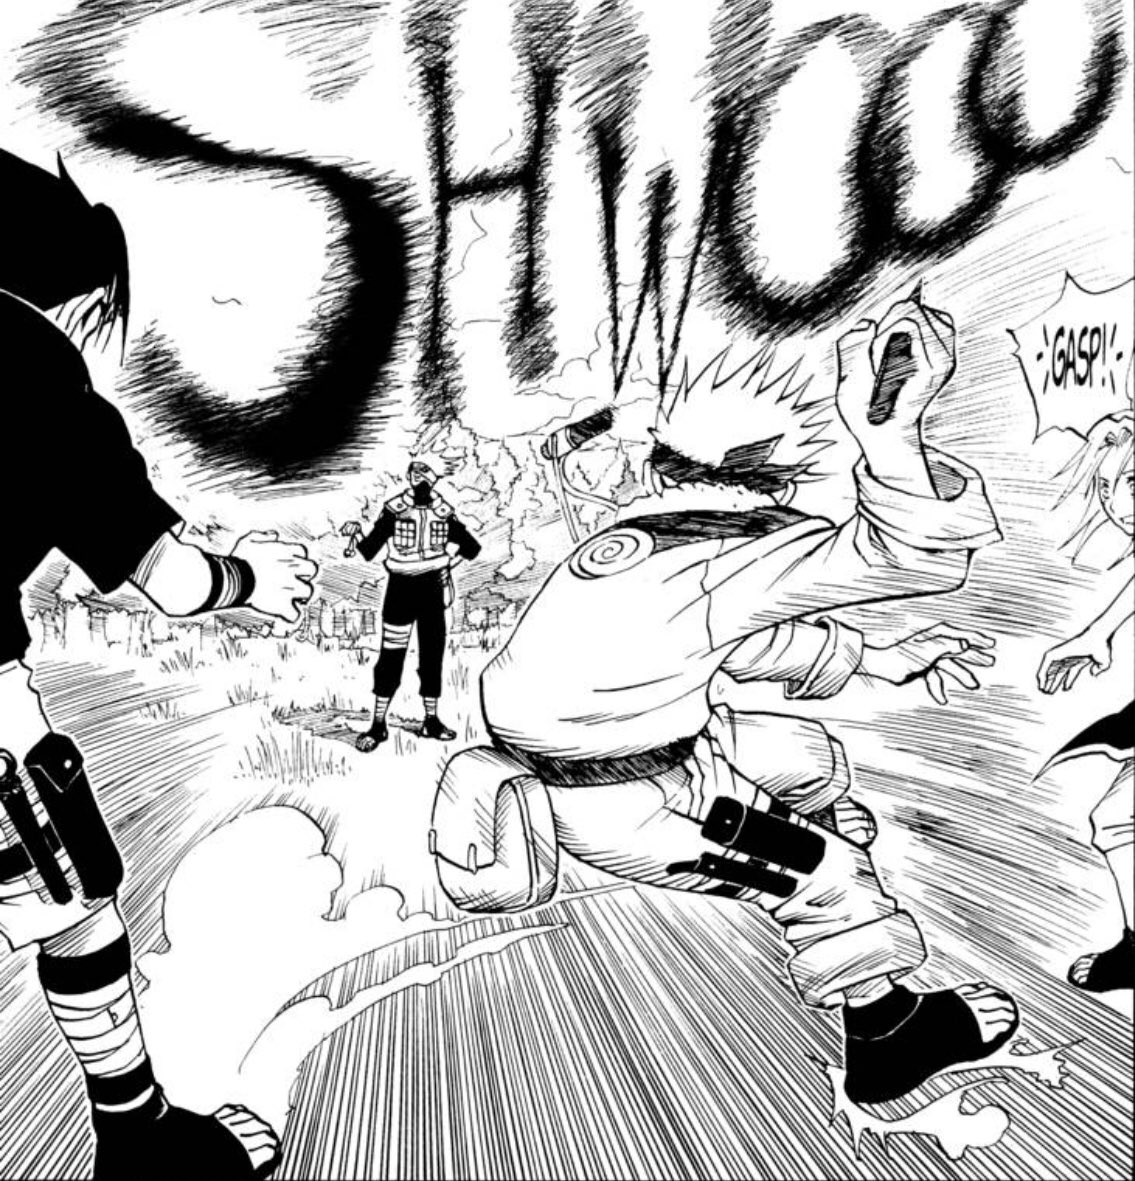 Hot dang what an action sequence. I like that Kishimoto uses the tight spindles of speed lines but they don’t overlay the characters ir scenes. There’s a baseball pitcher on the mound kinda vibe too, real sense of the natural physicality. Great sfx too - SHWOOO  #Grantuto